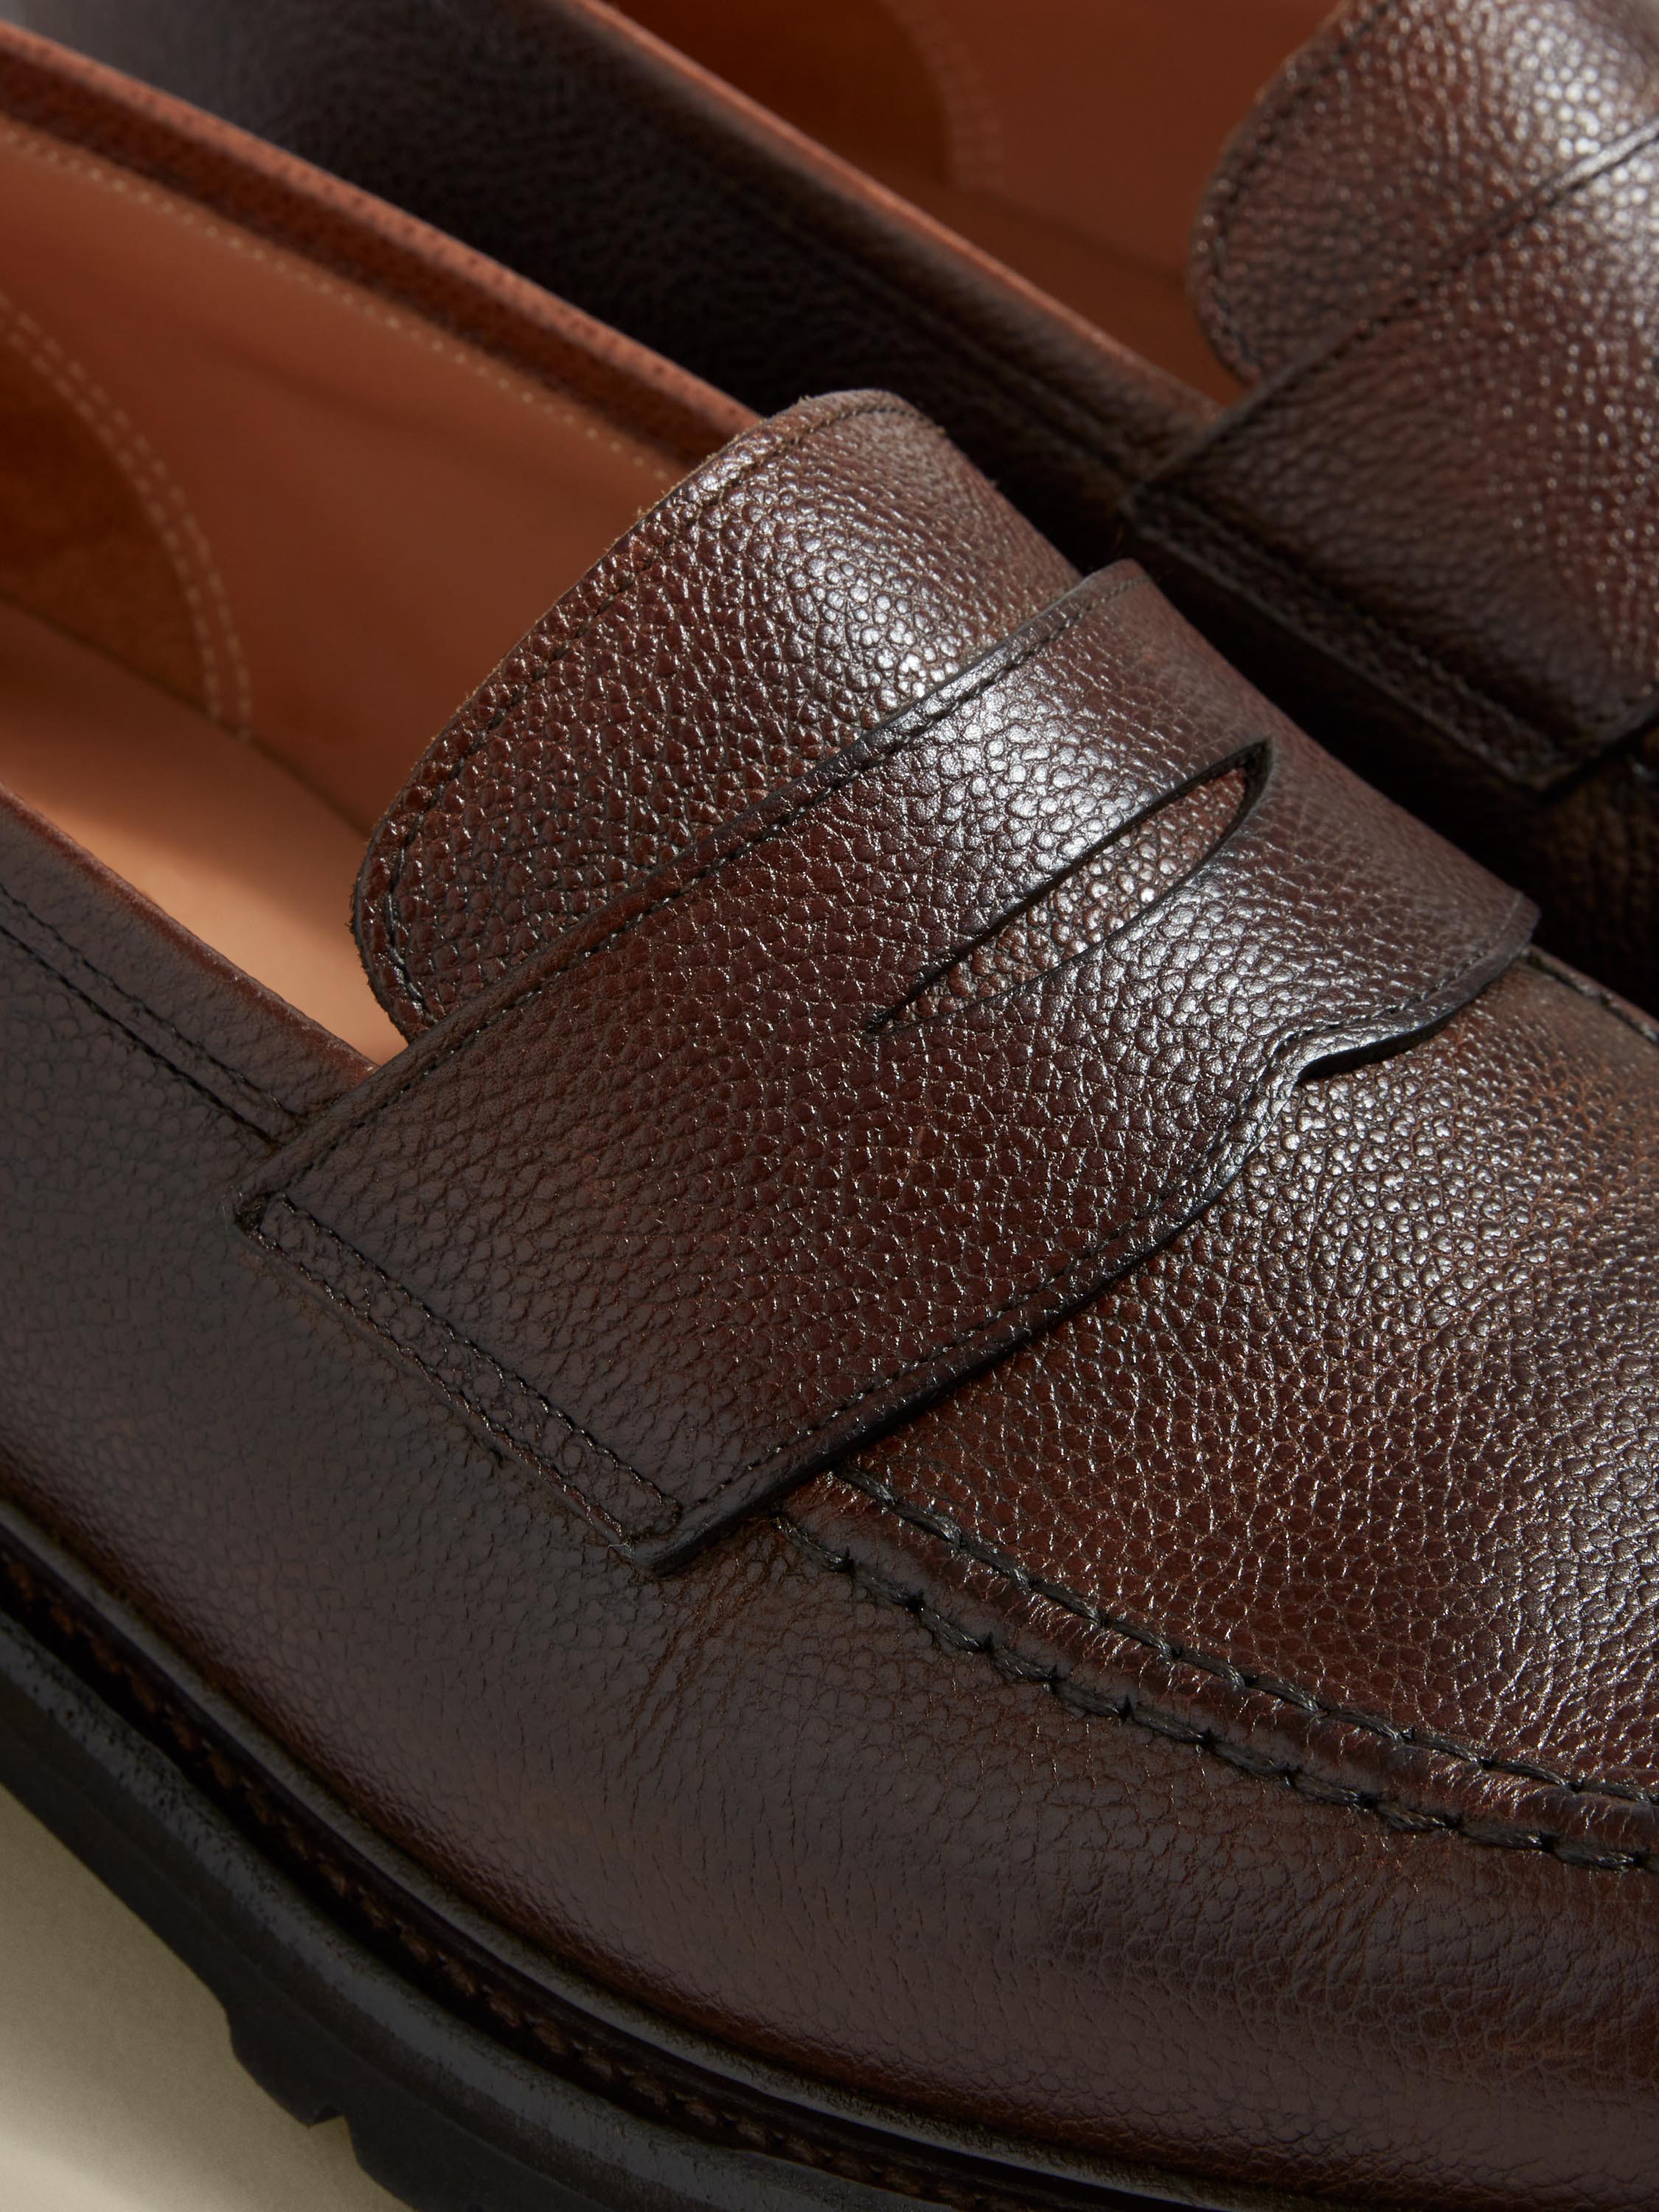 Pebble Grain Leather Penny Loafer Shoes Brown Product Image Detail